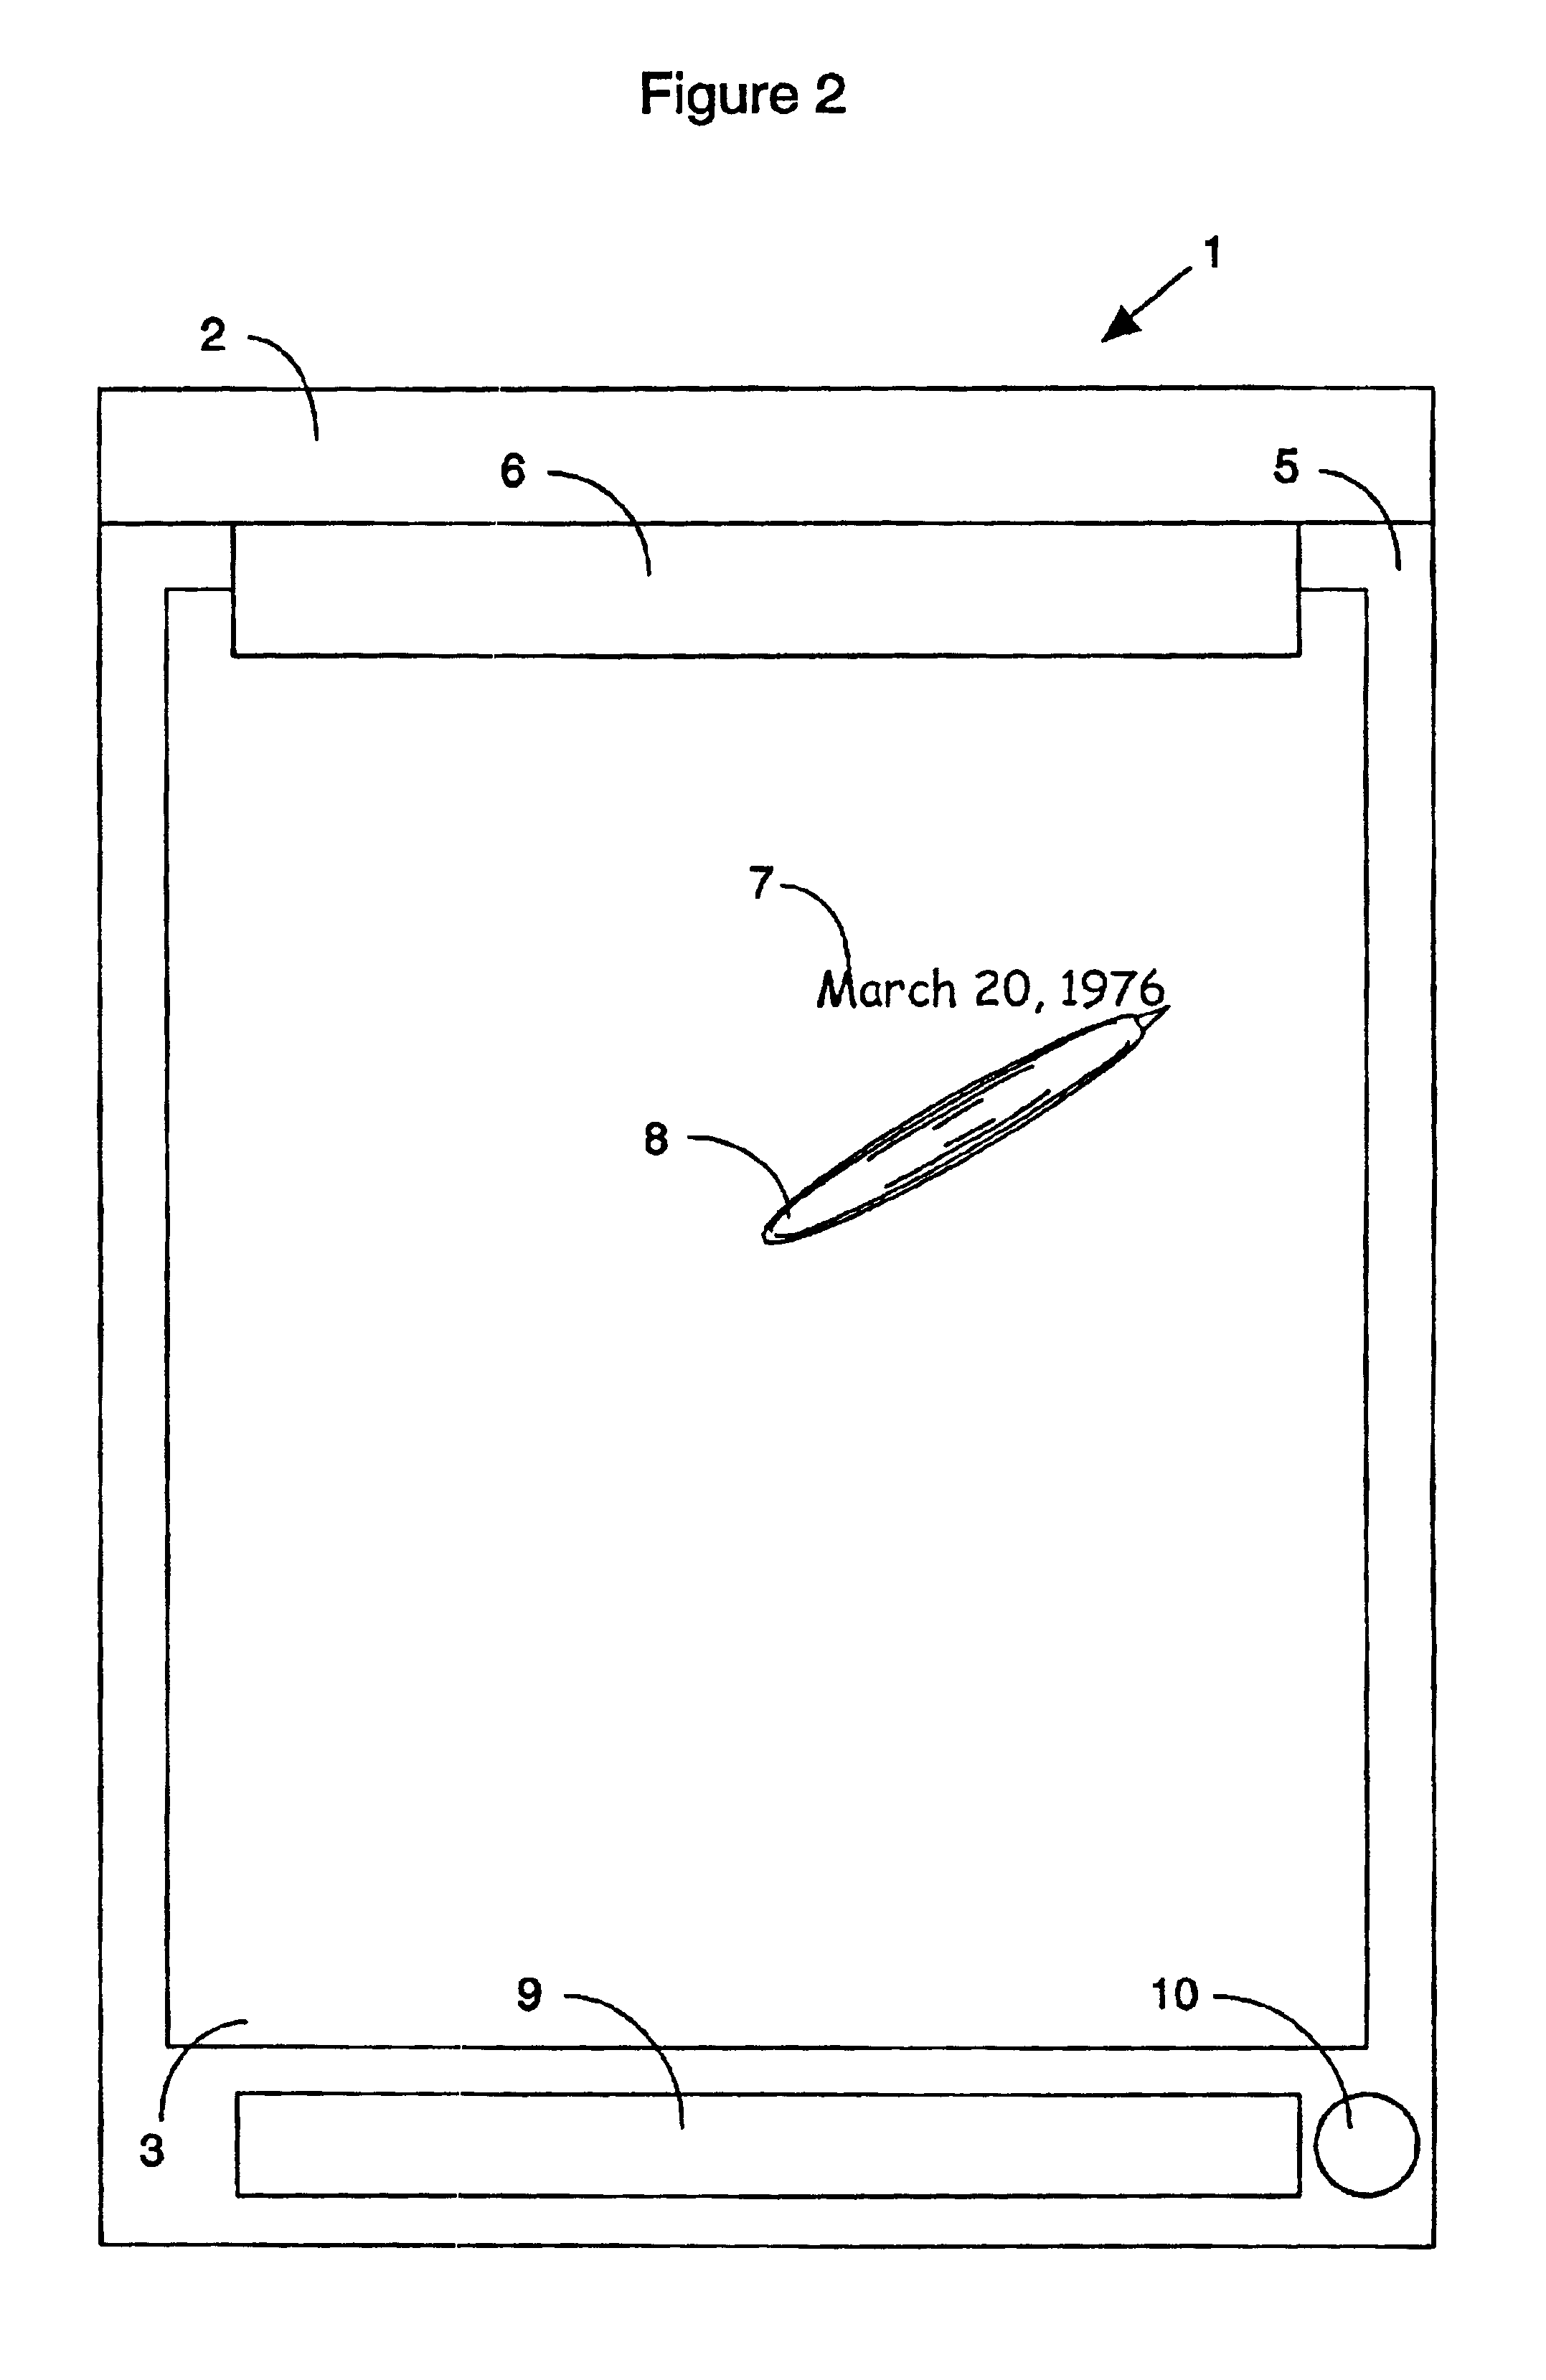 Apparatus and method for automatic form recognition and pagination